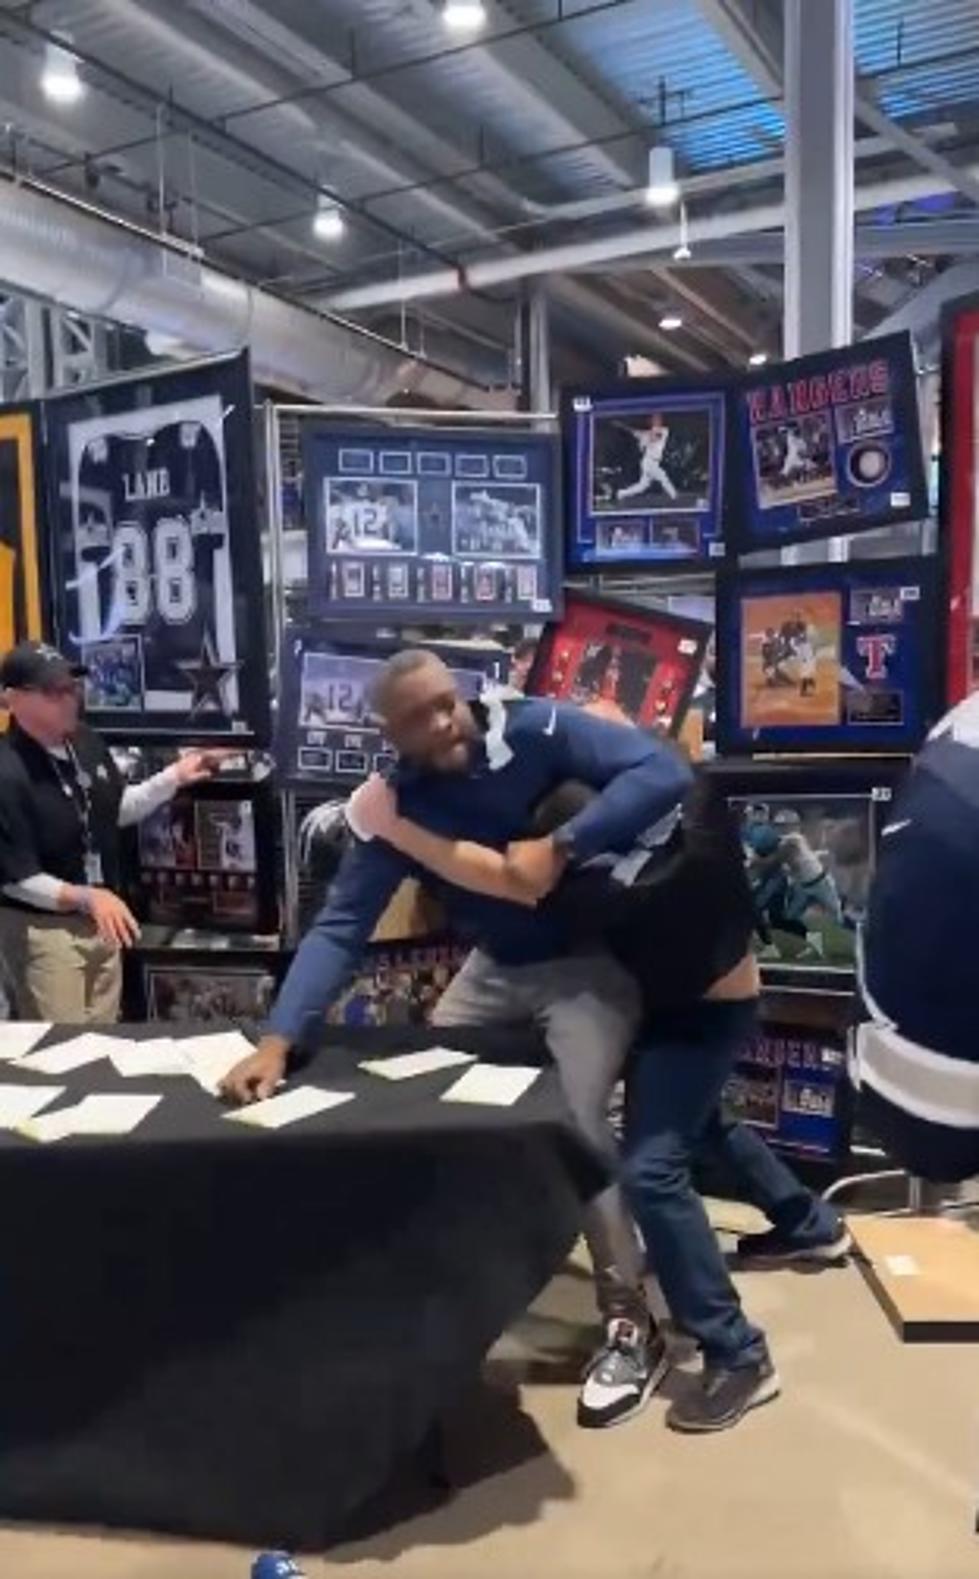 Dallas Cowboys Fan Almost Breaks Pricy Collectibles During Fight